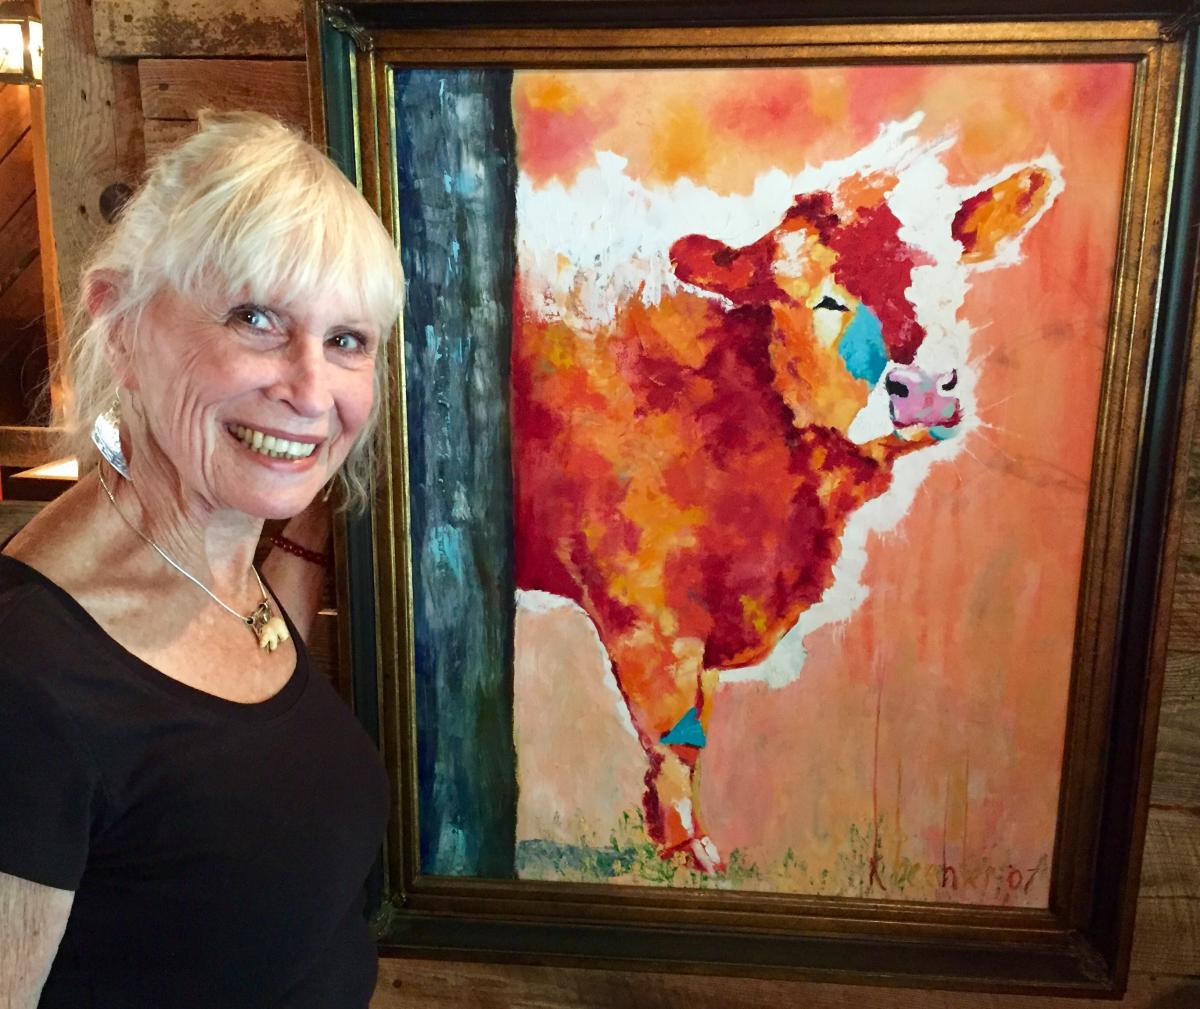 Photograph of artist Penny Bradley at her easel